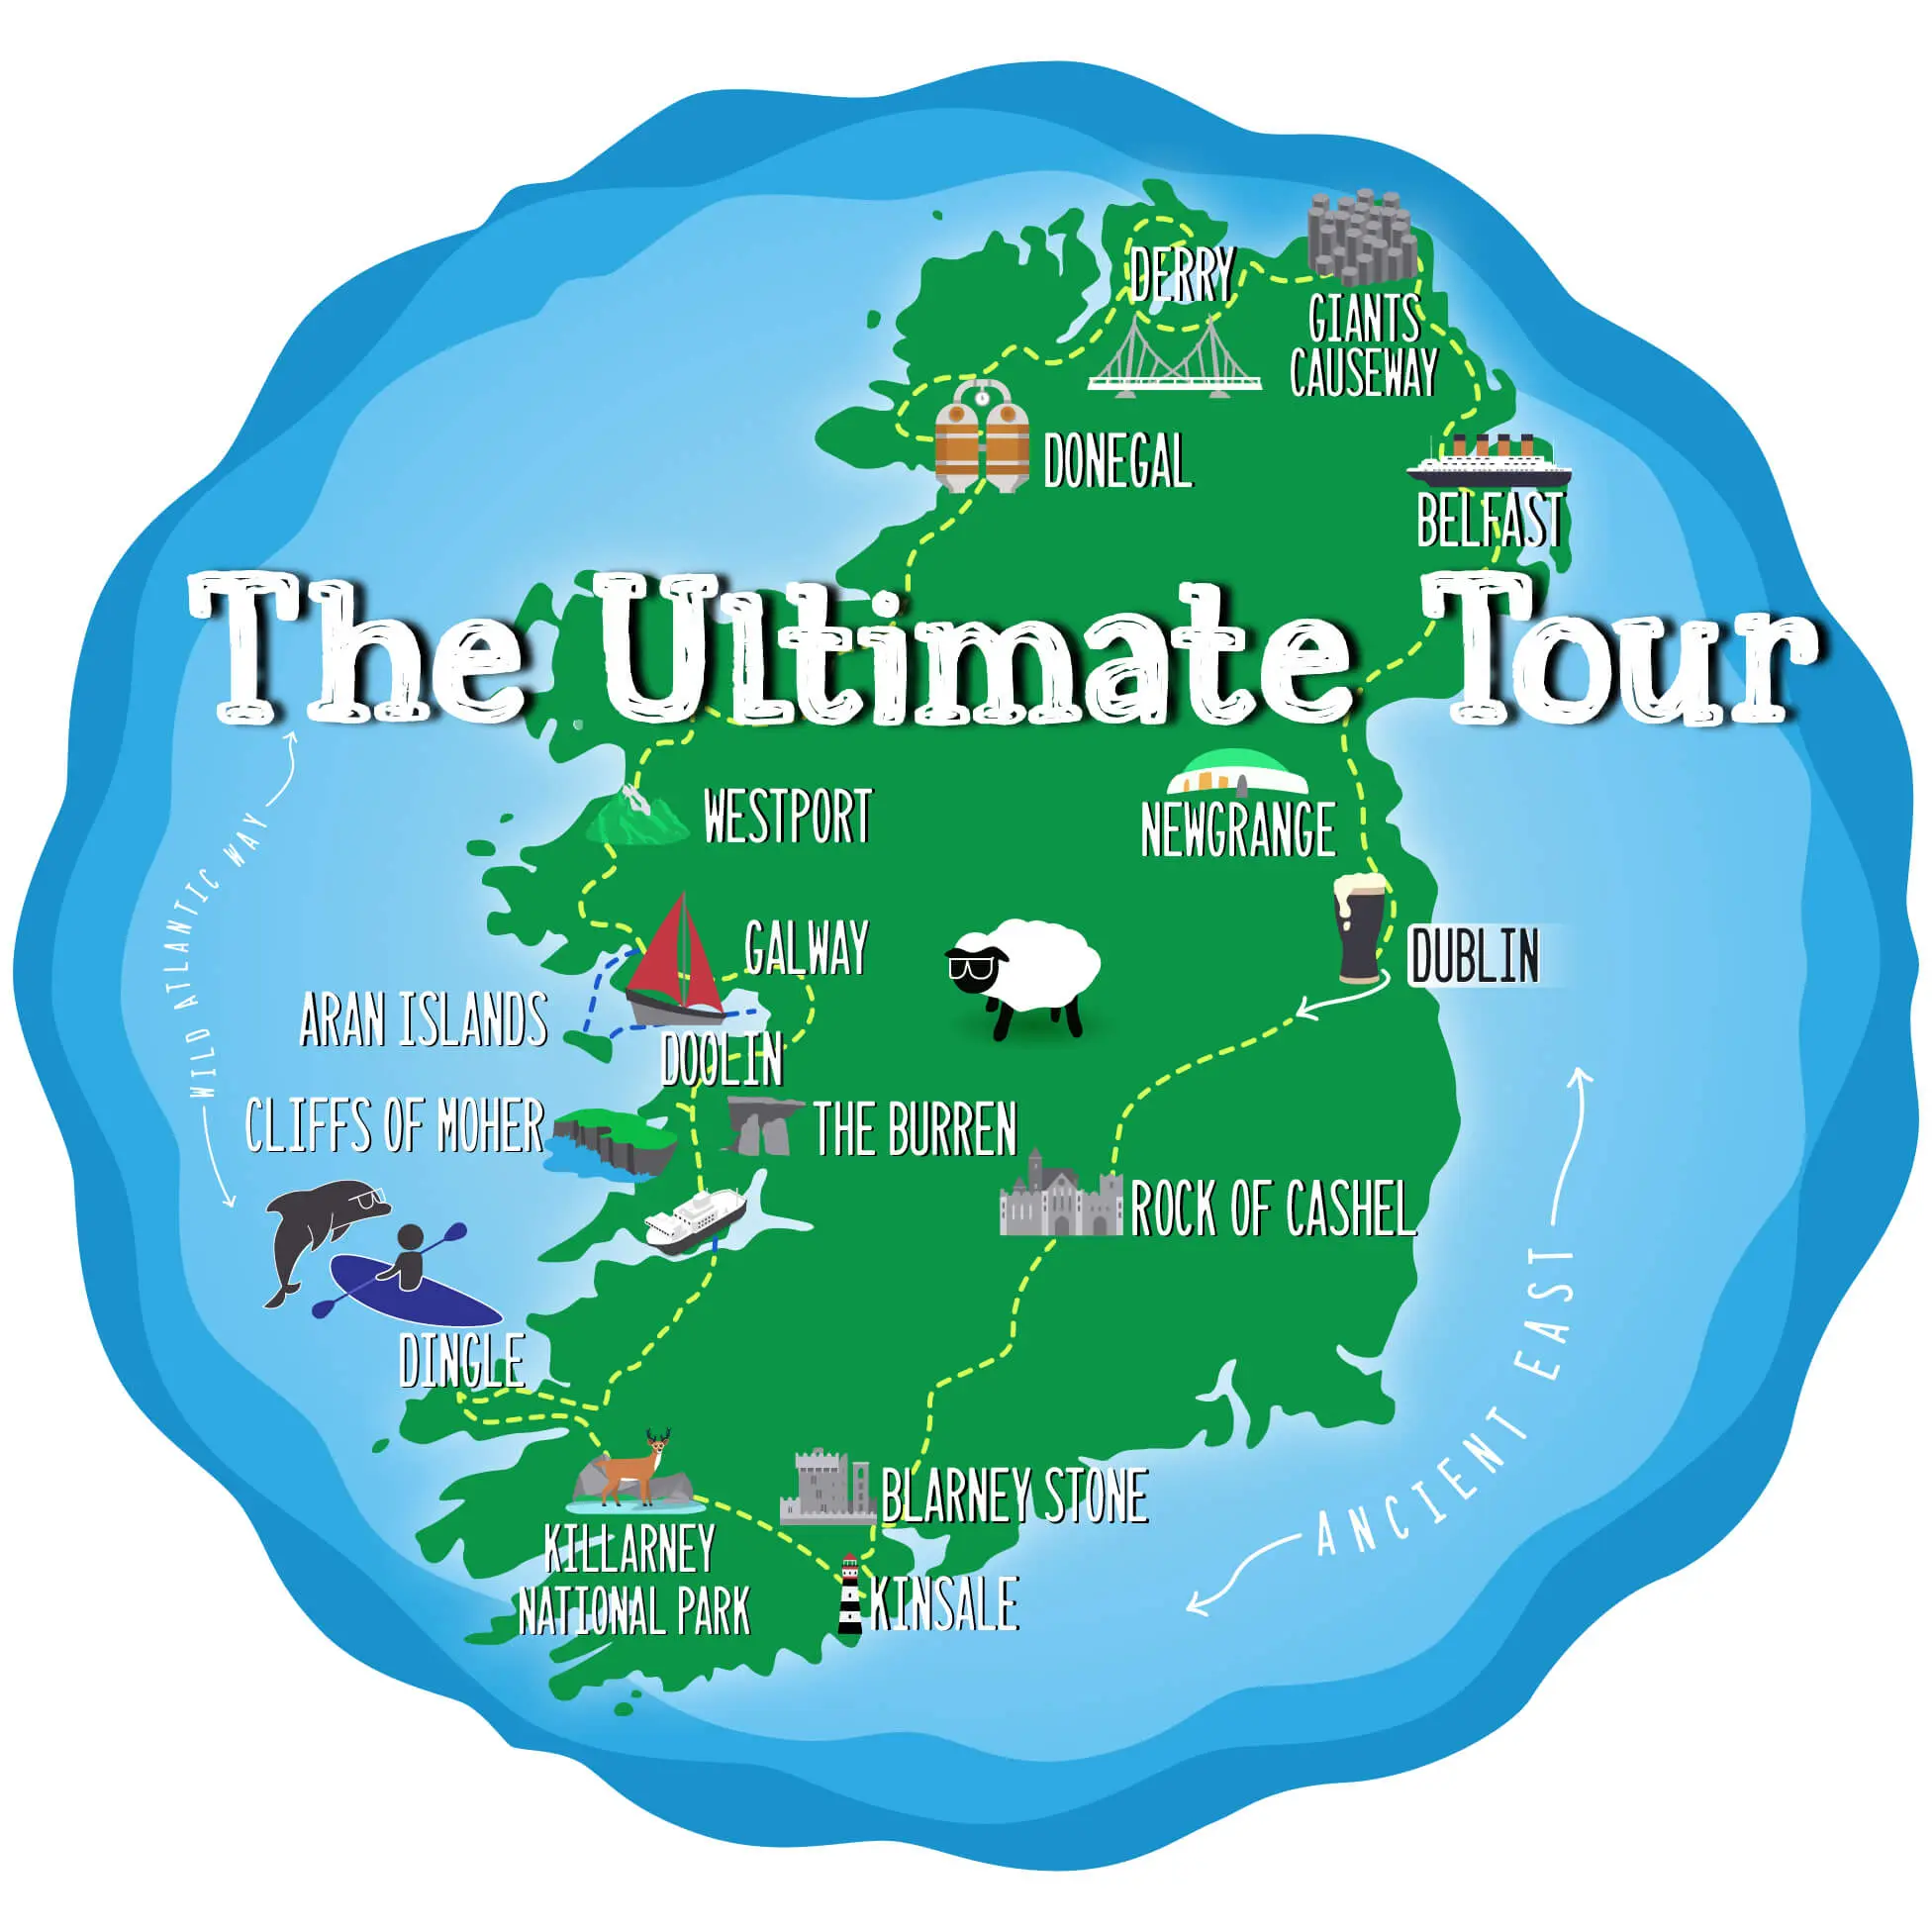 Illustrated map of Ireland highlighting various tourist destinations for "the ultimate self-drive tour.